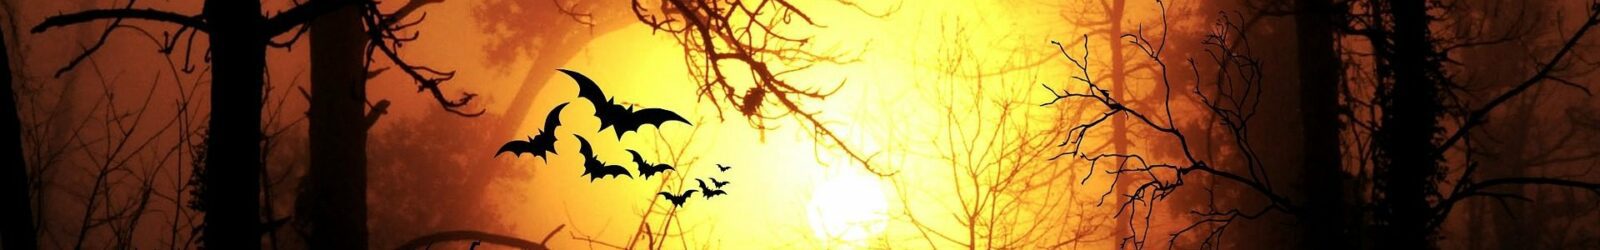 Halloween Picture with bats and trees alongside a grave